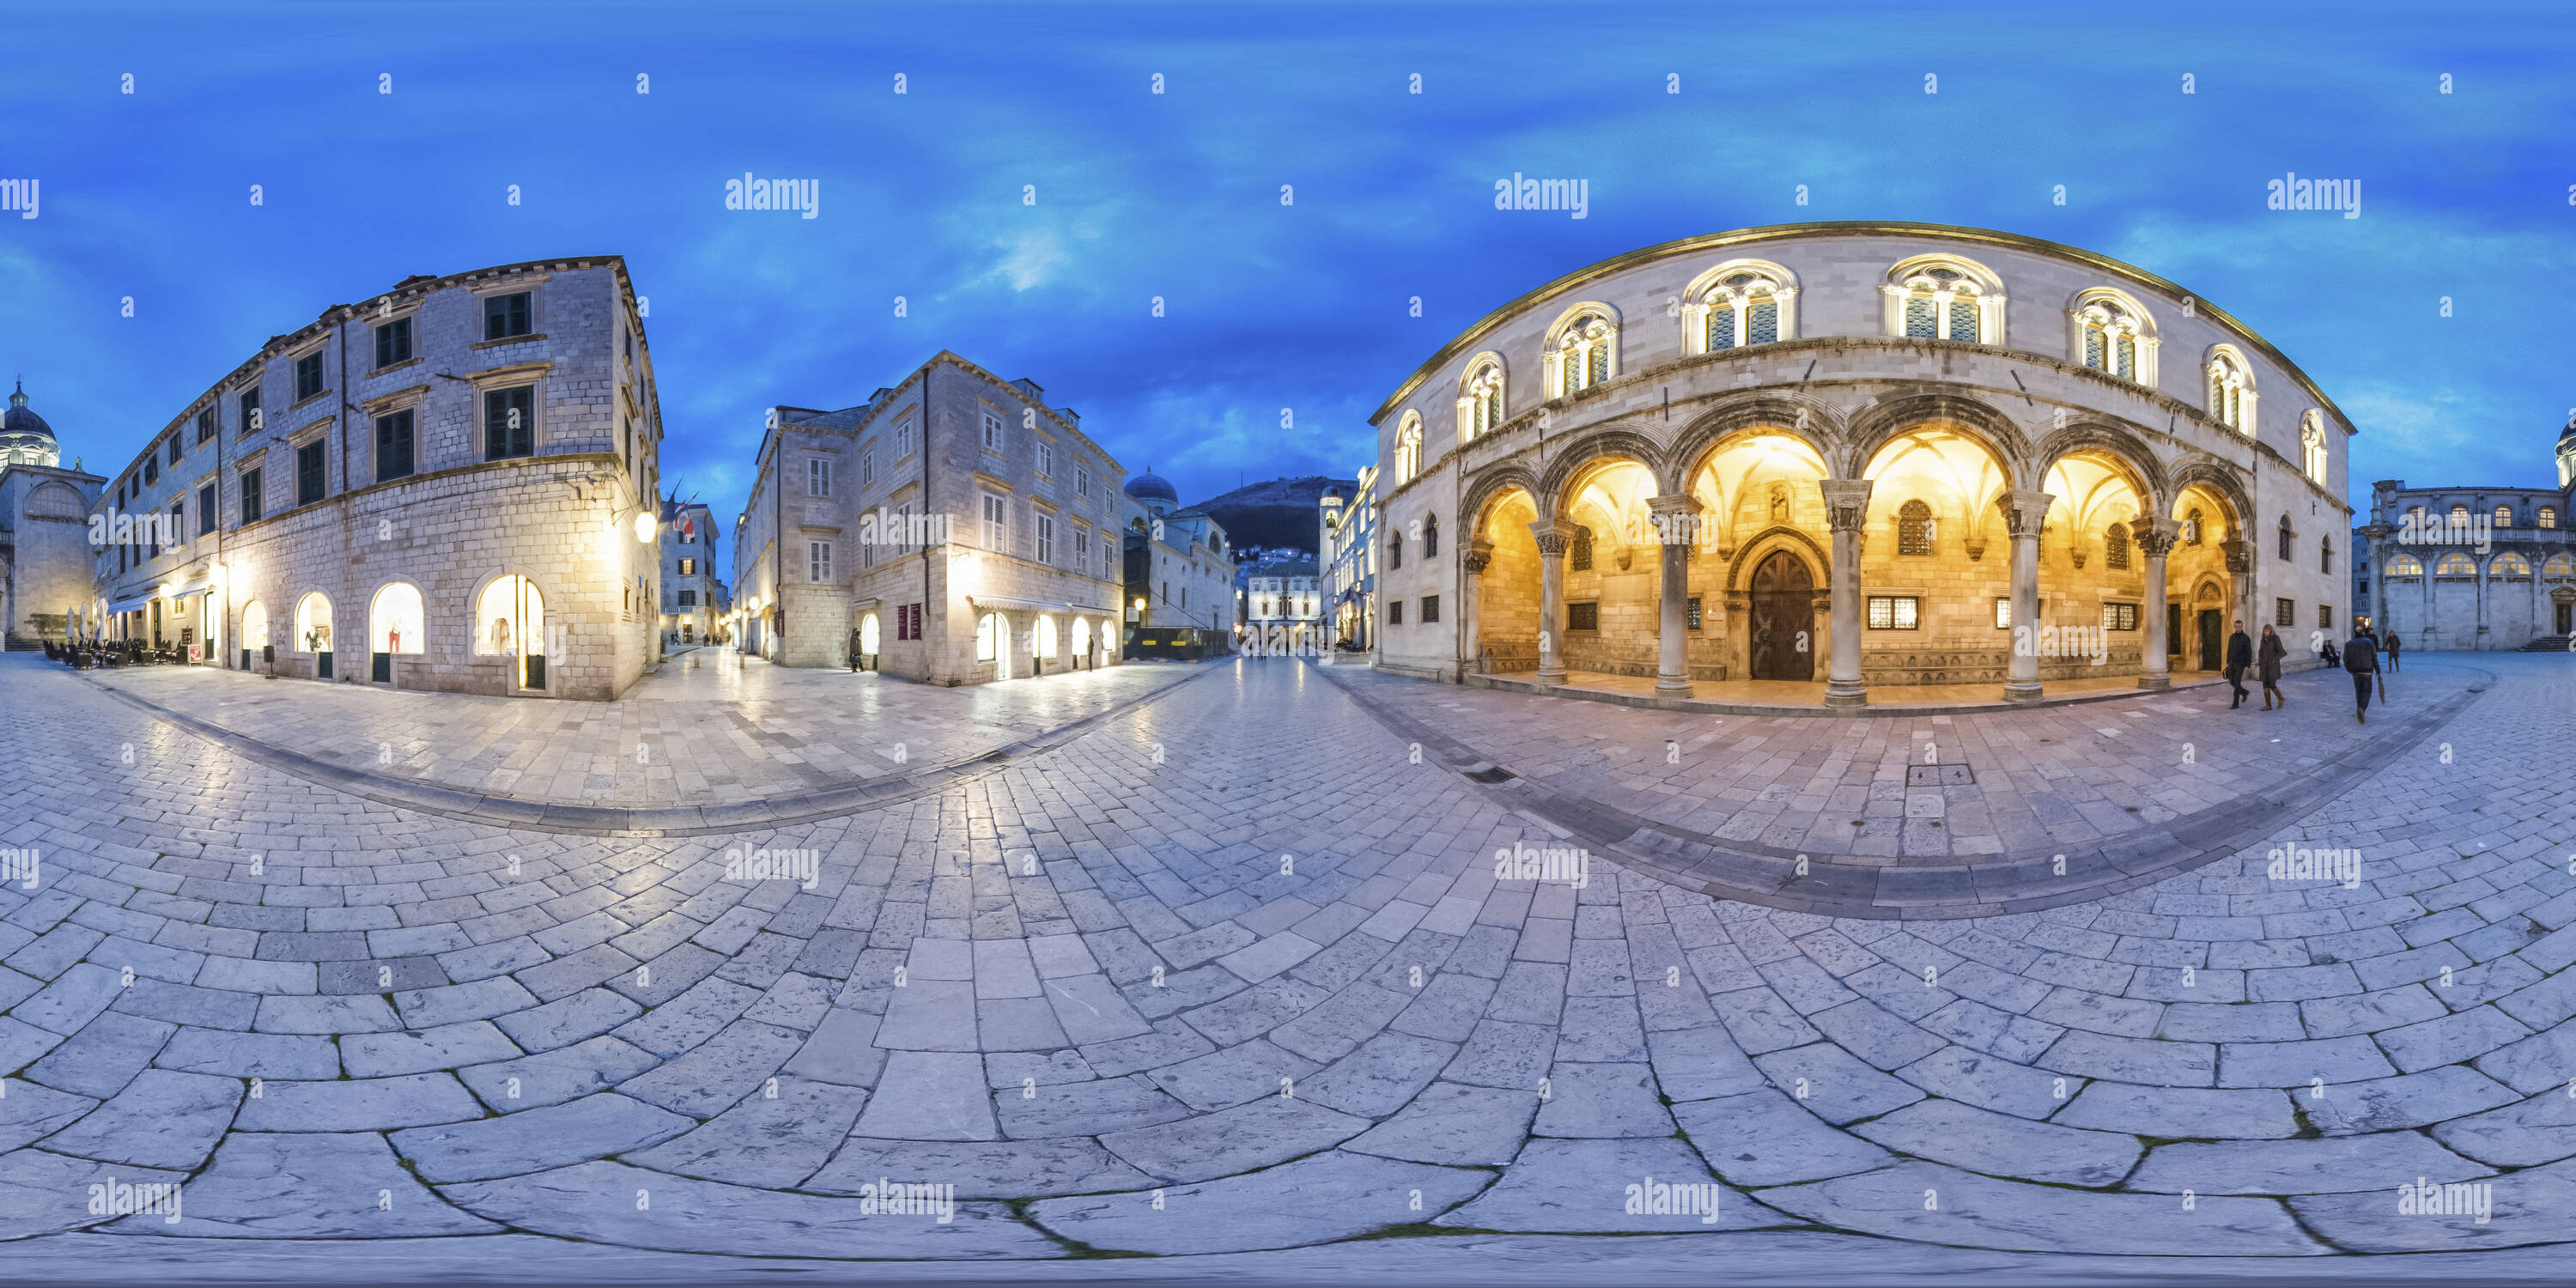 360 degree panoramic view of Rector Palace and Cathedral in Dubrovnik at blue hour on Good Friday 2013.